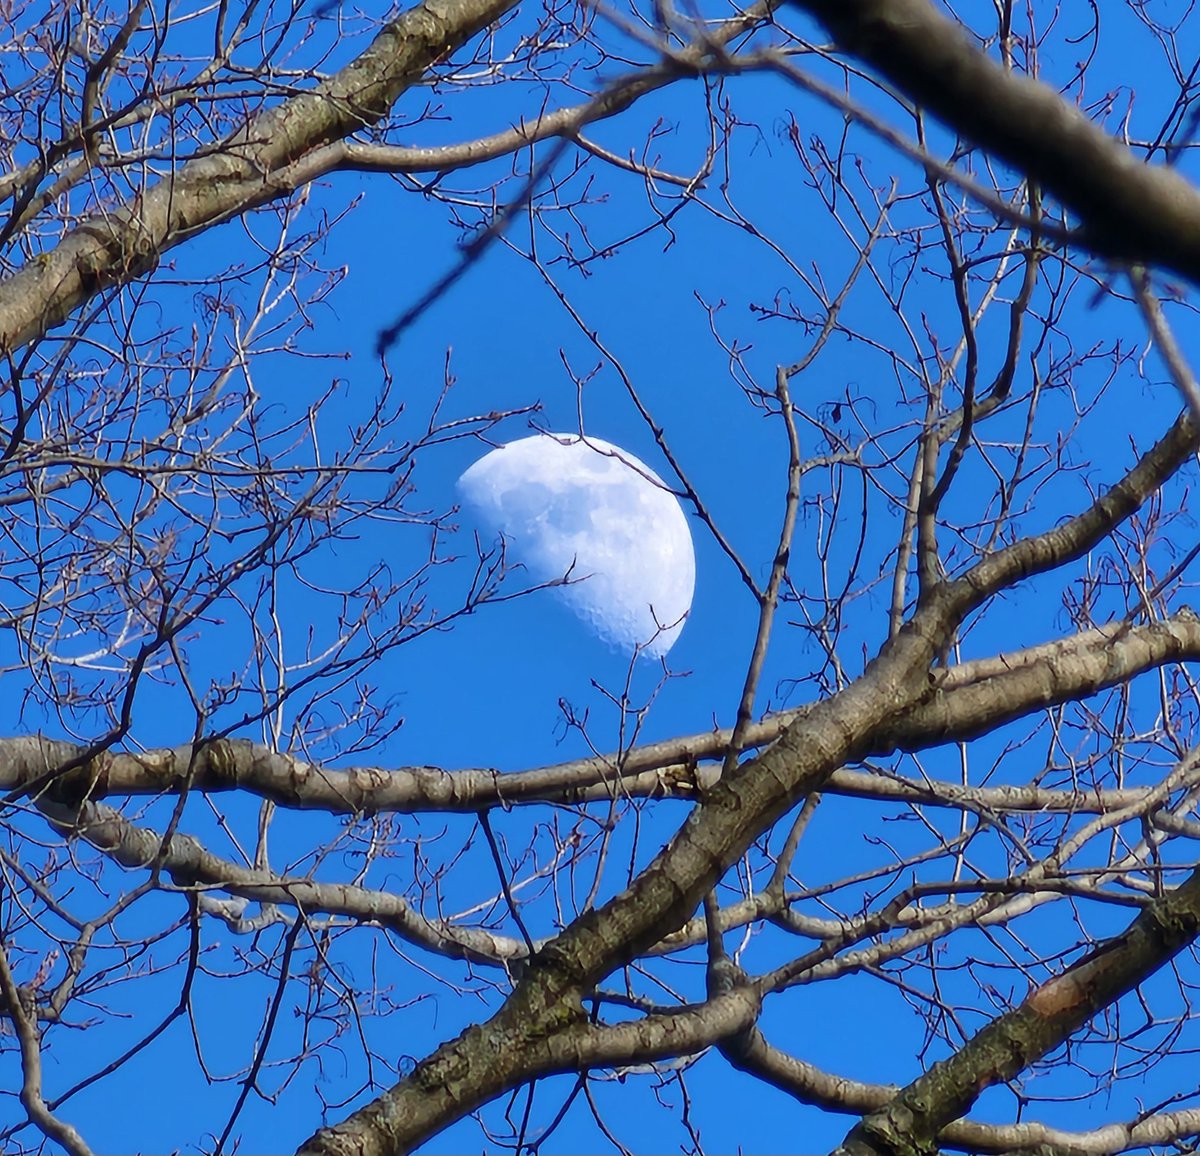 I call this one Moon through the tree branches. 😆